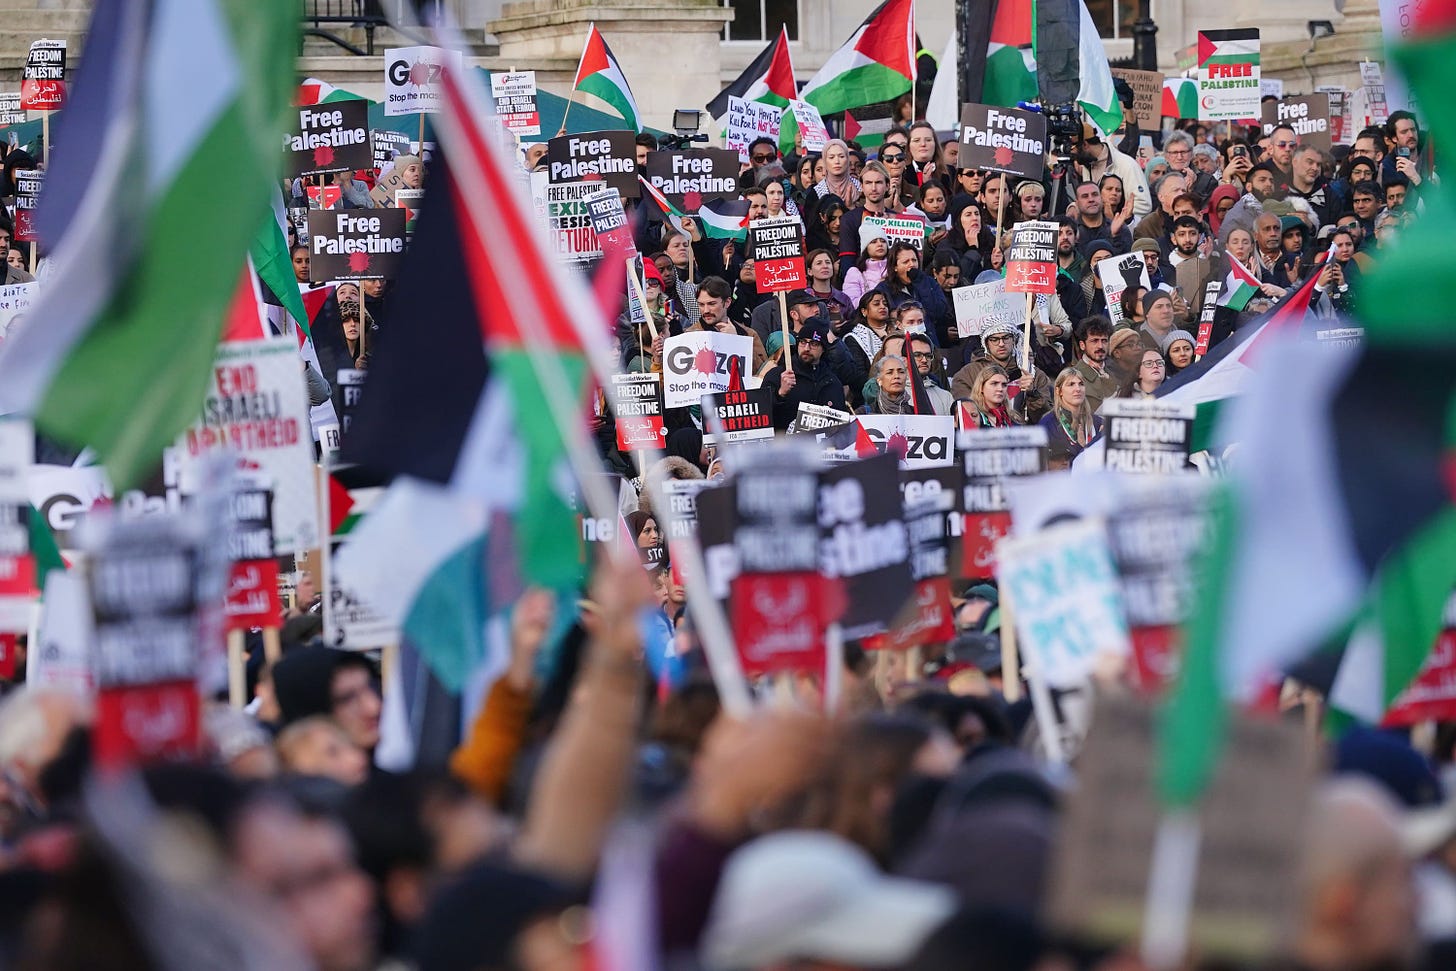 Why is a pro-Palestine march happening on Saturday and why is it  controversial? | The Independent